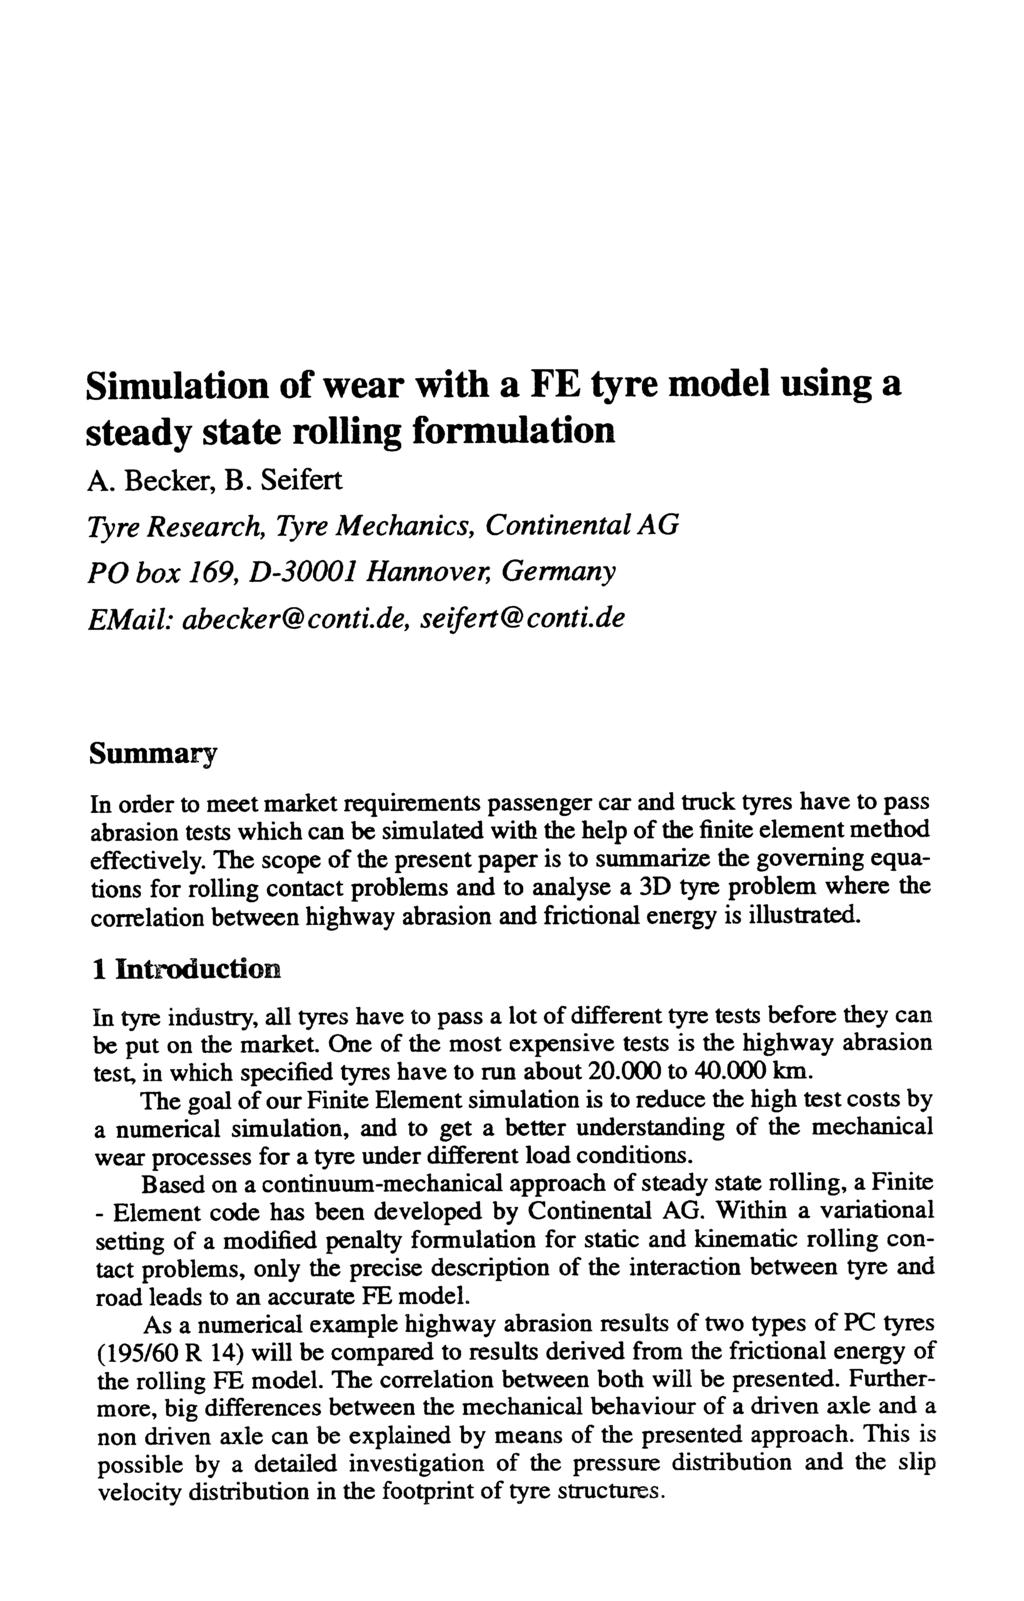 Simulation of wear with a FE tyre model using a steady state rolling formulation A. Becker, B.